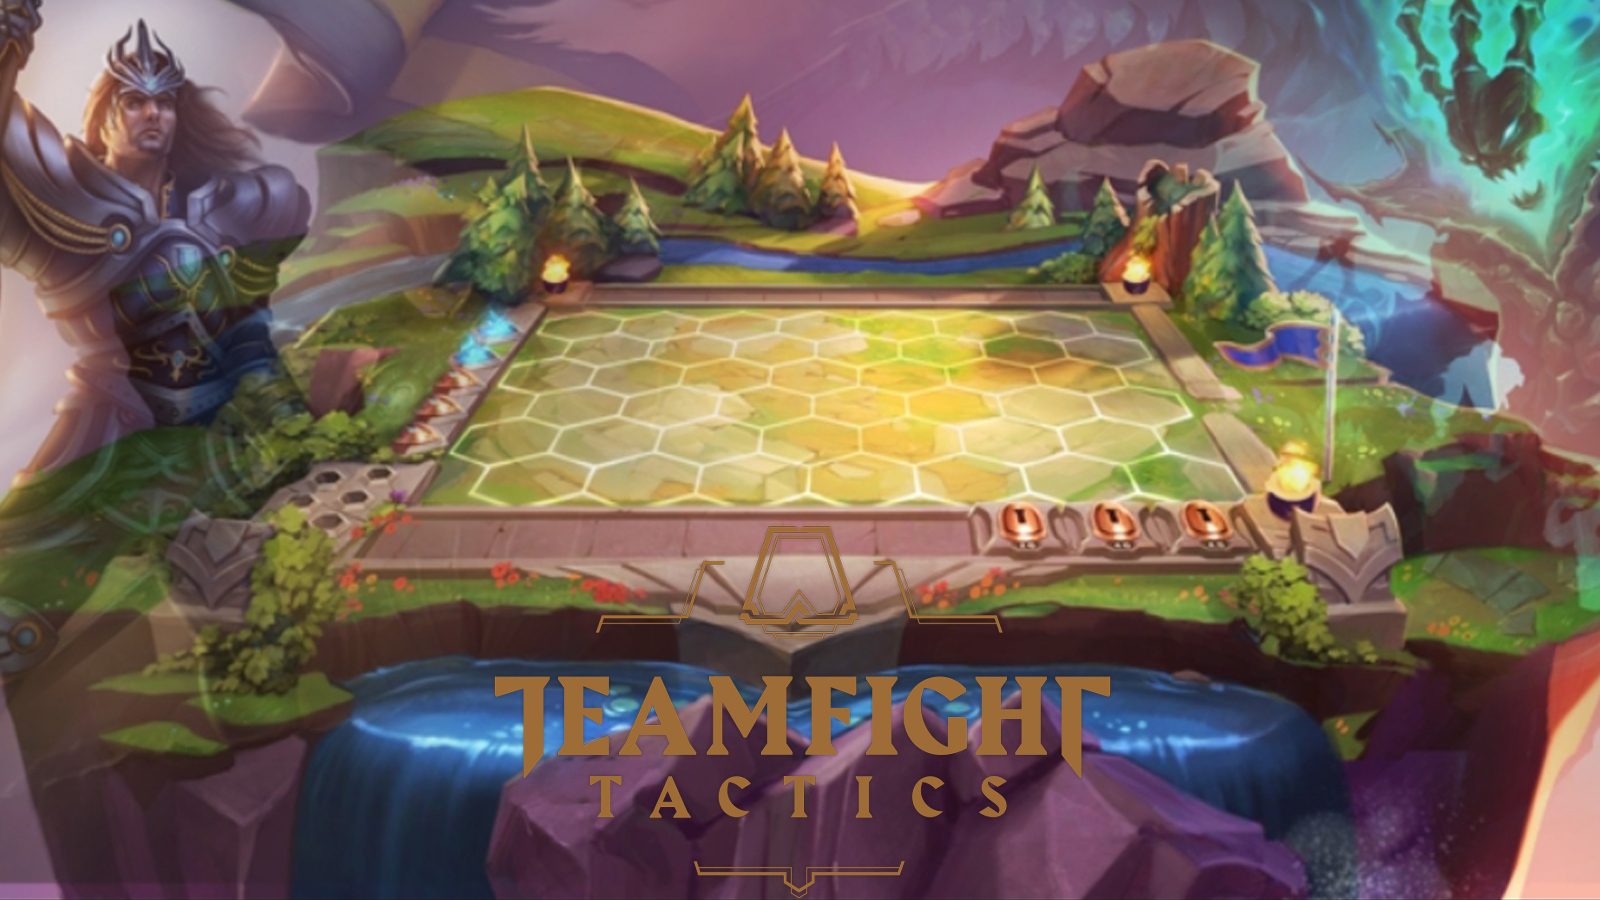 How to play Auto Chess - strategy and tips for Teamfight Tactics